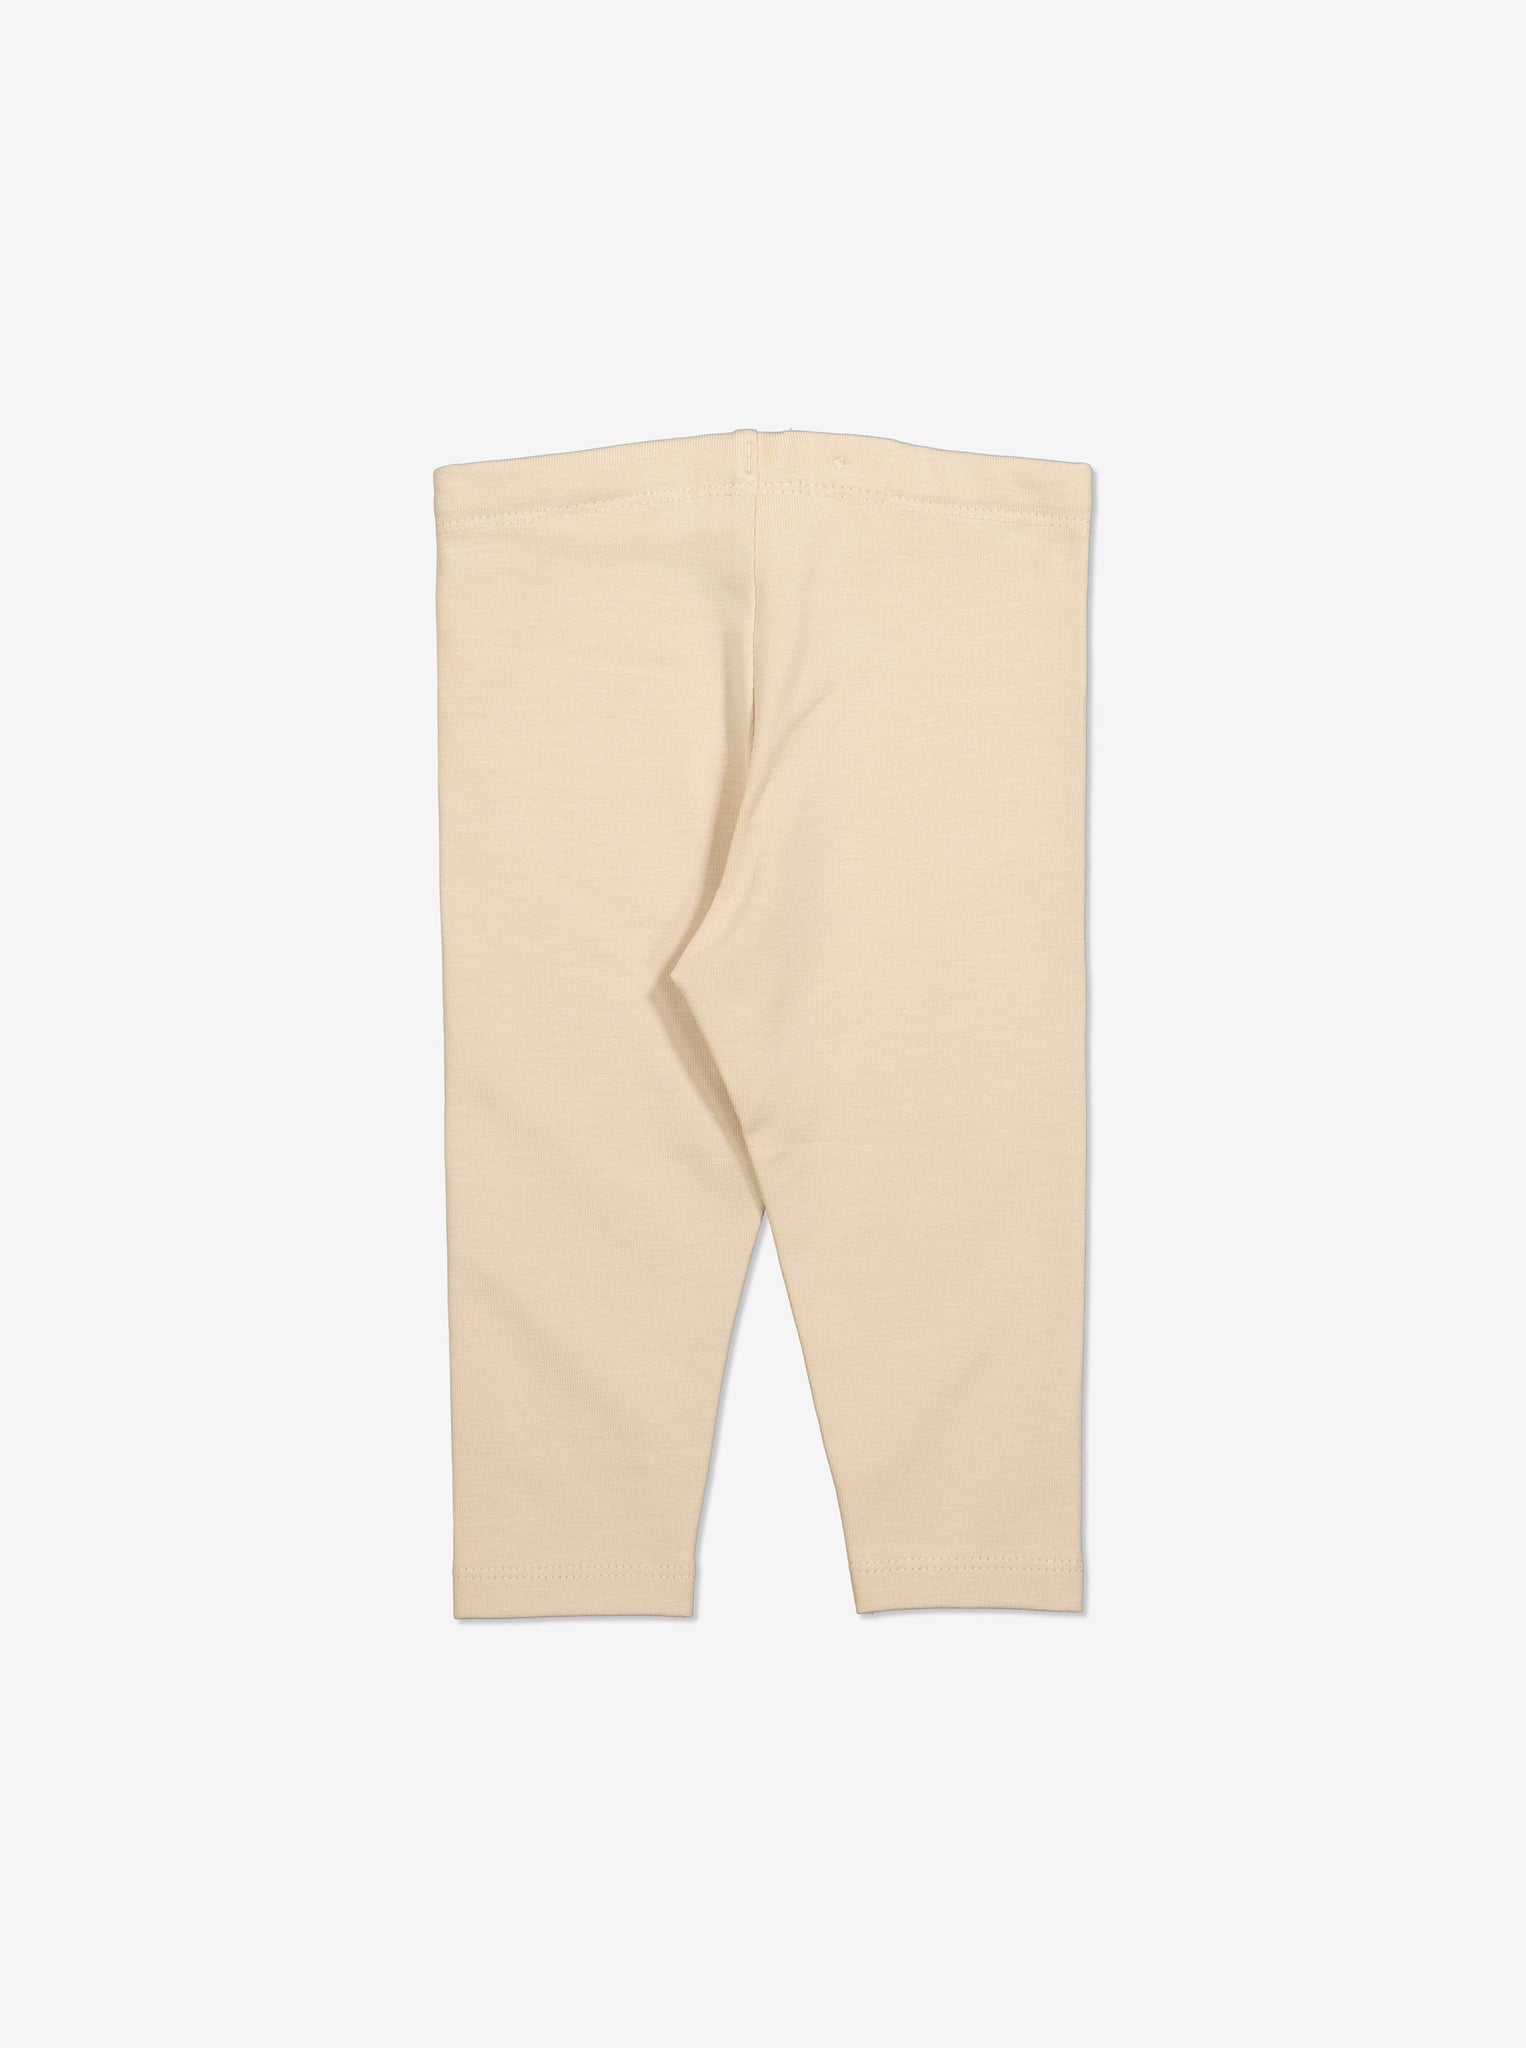  Organic Cotton Beige Baby Leggings from Polarn O. Pyret Kidswear. Made from sustainably sourced materials.